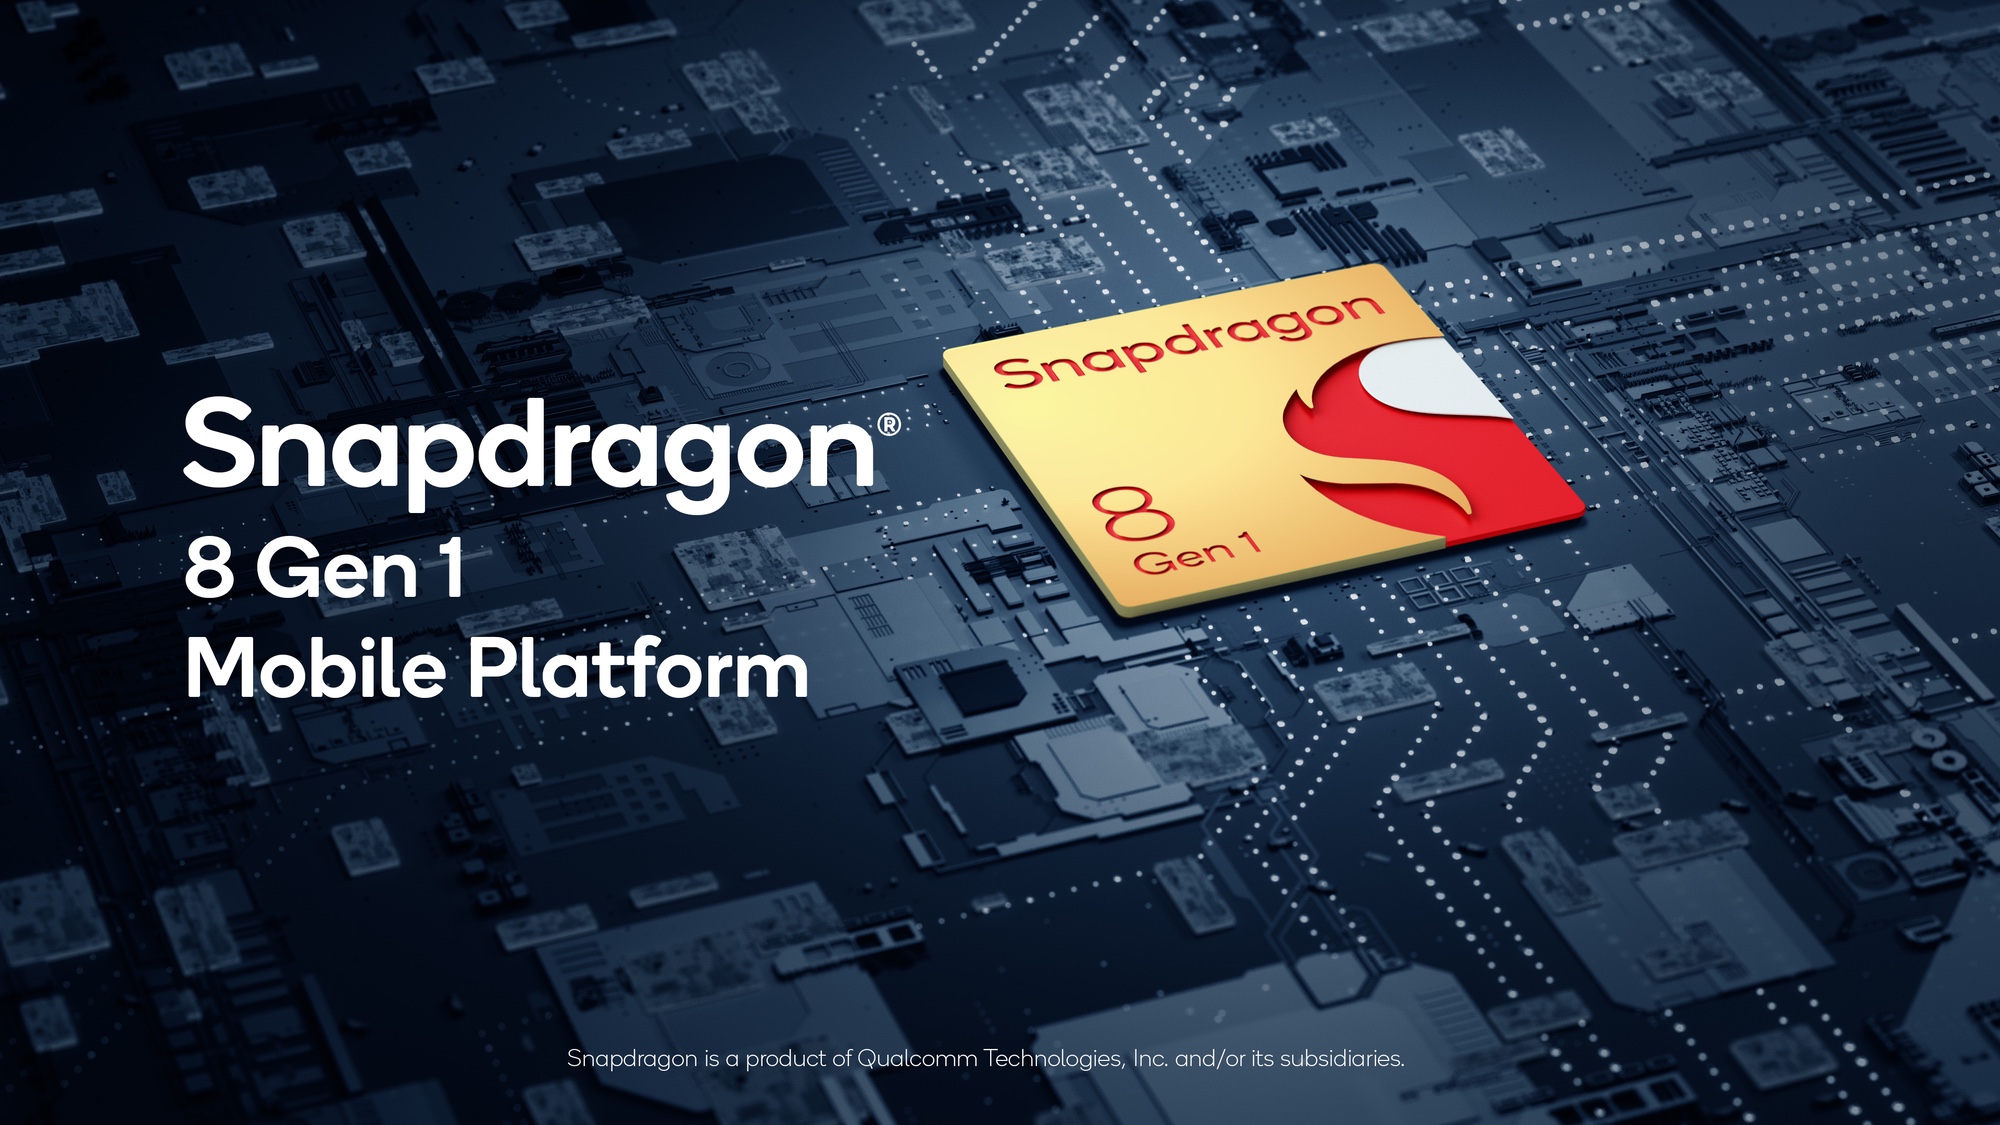 The Snapdragon 8 Gen 1 on a circuit board